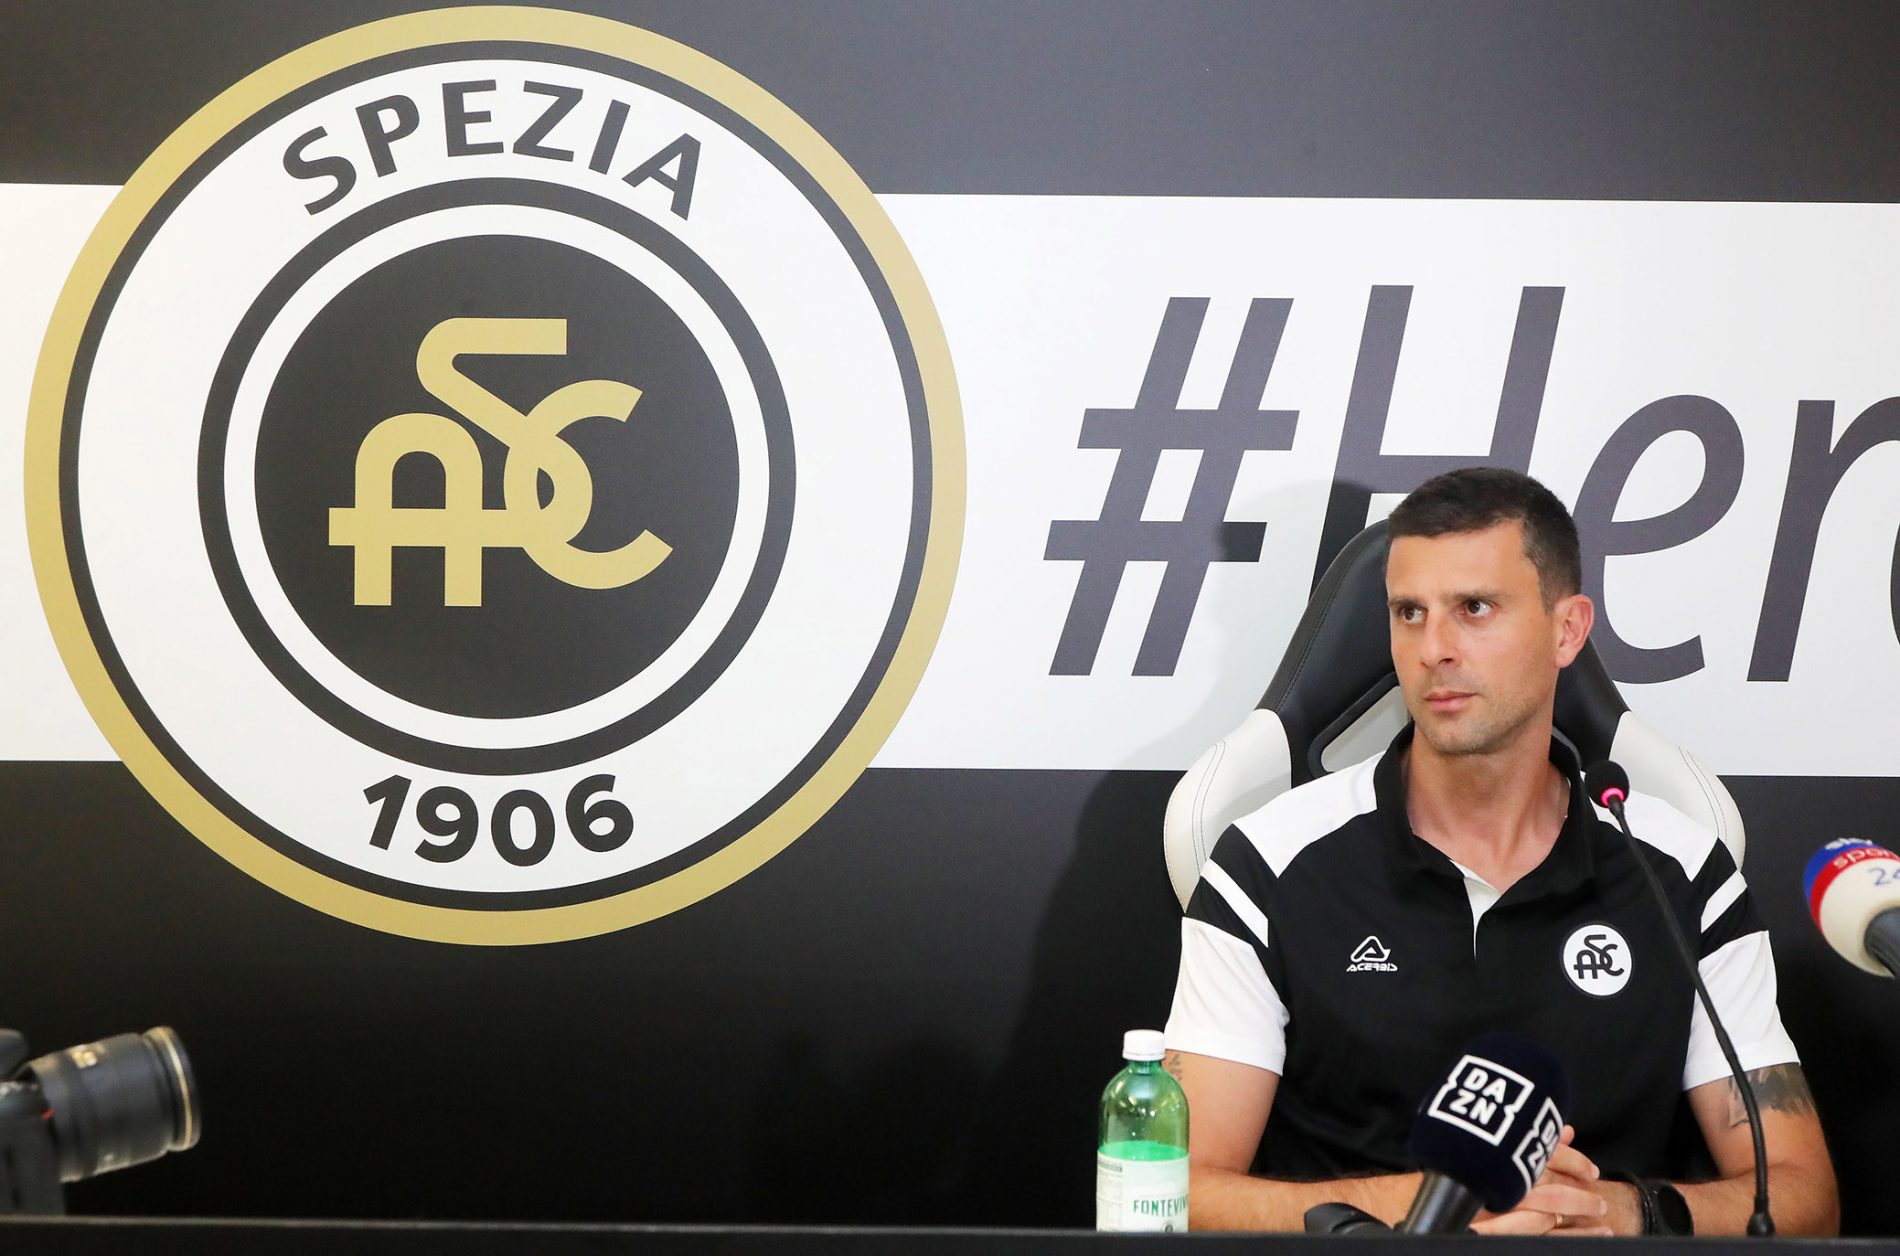 Away pen – Lorenzelli (CalcioSpezia.it): “One point would be pure gold for the Eagles”